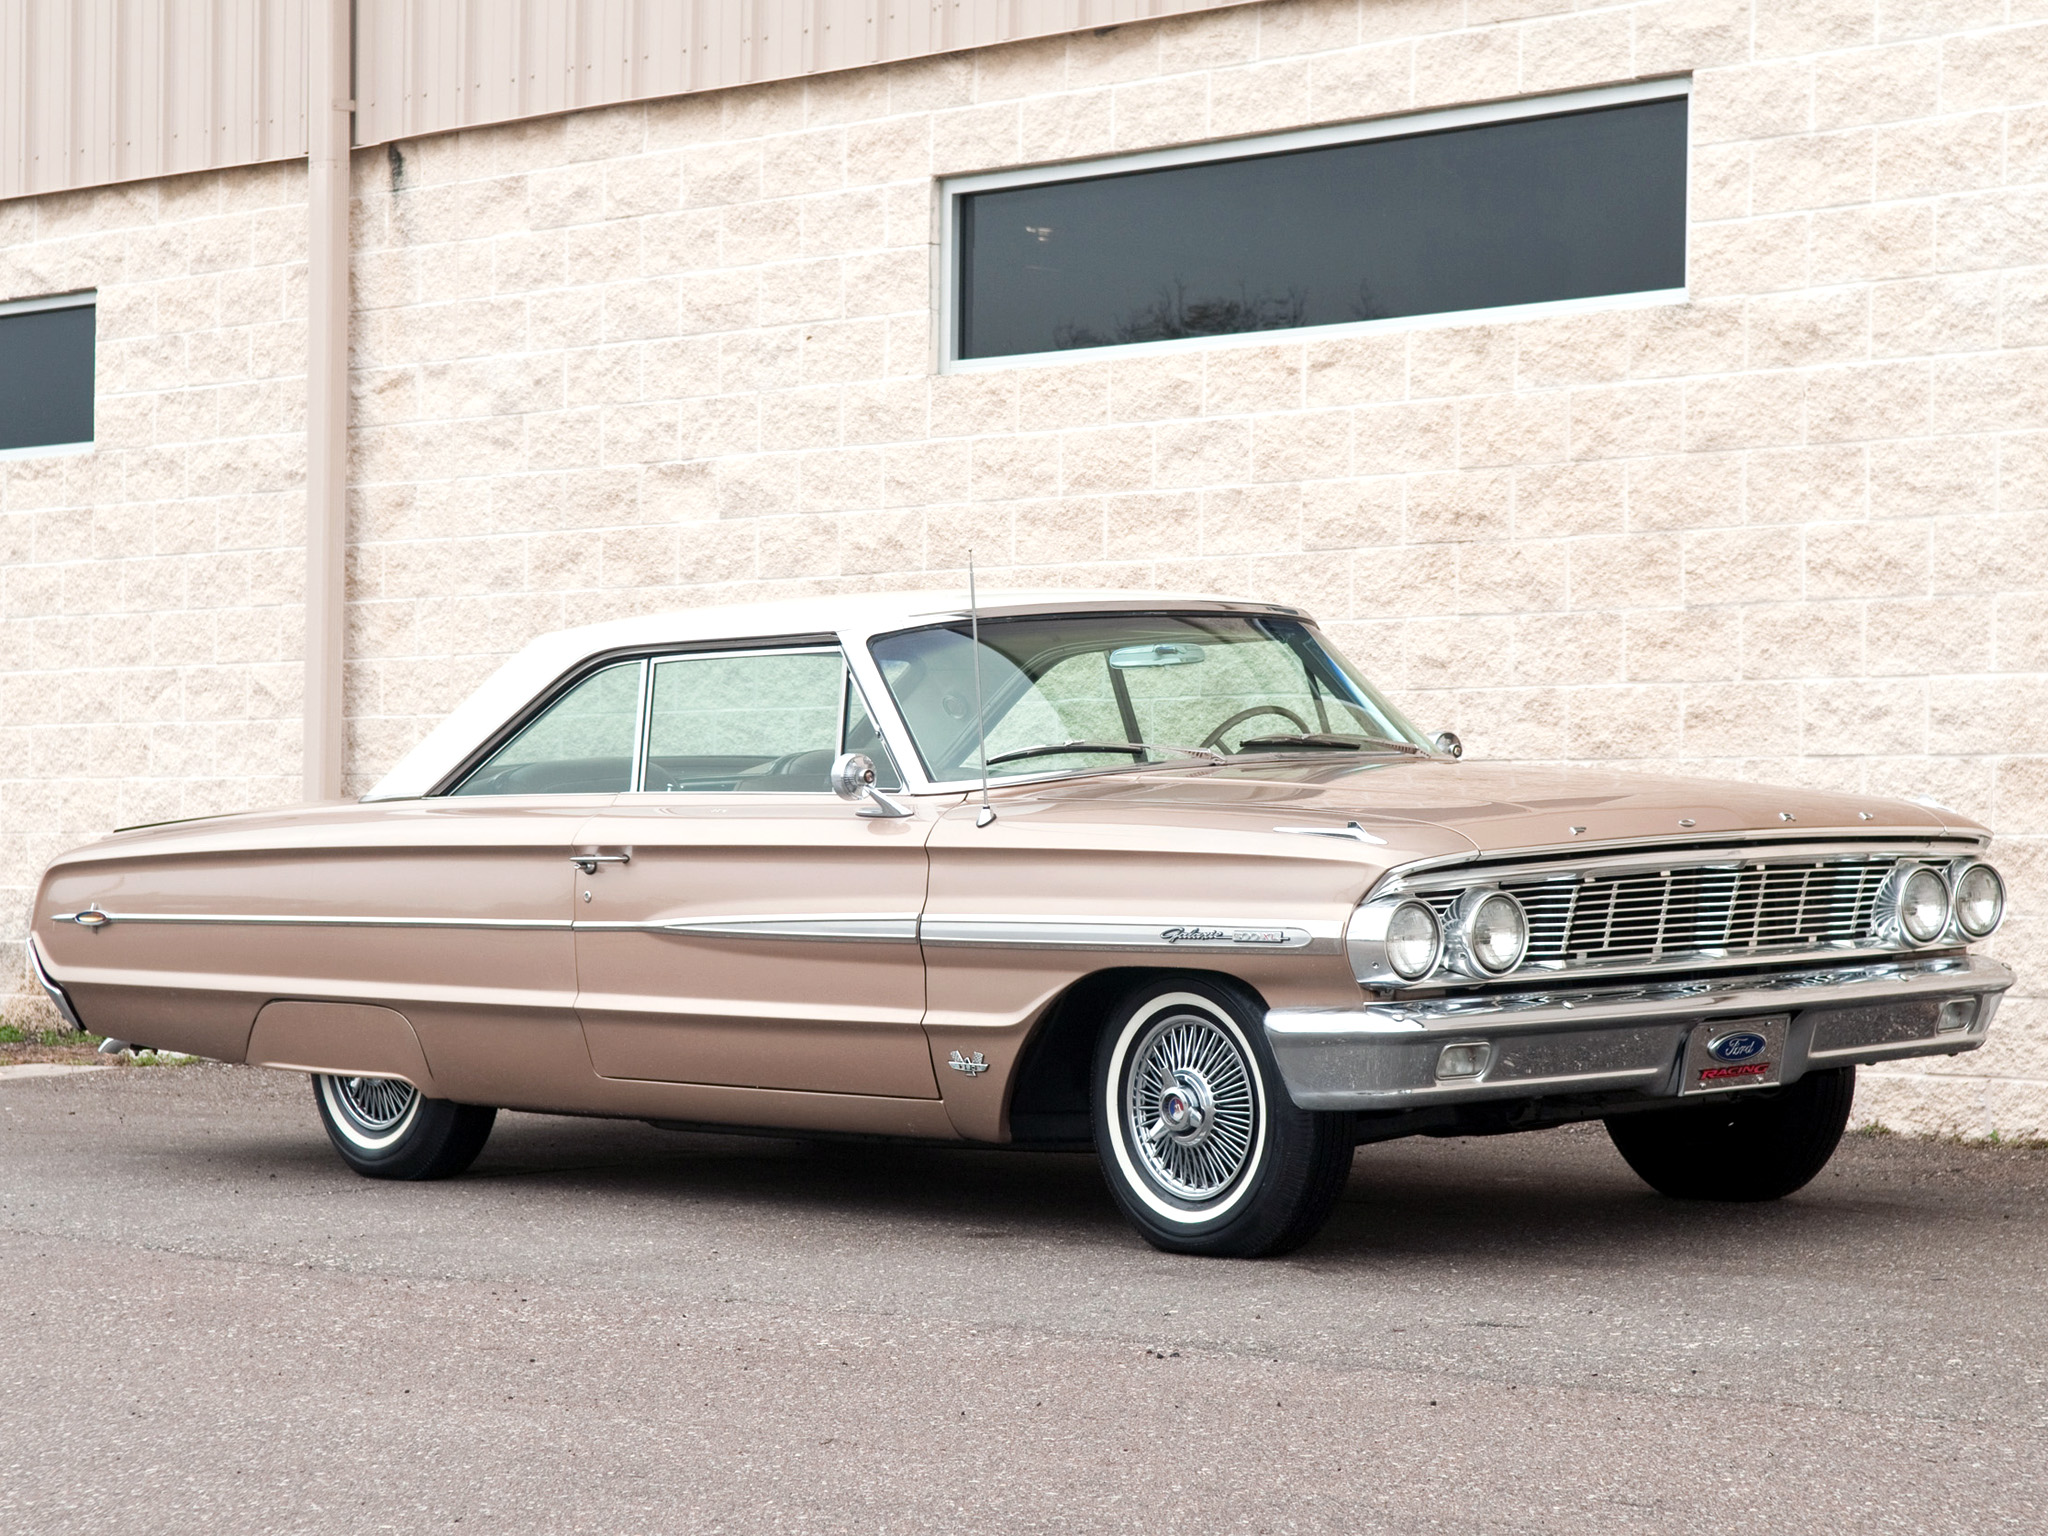 Ford Galaxie X L Hardtop Coupe Classic F Wallpaper Background